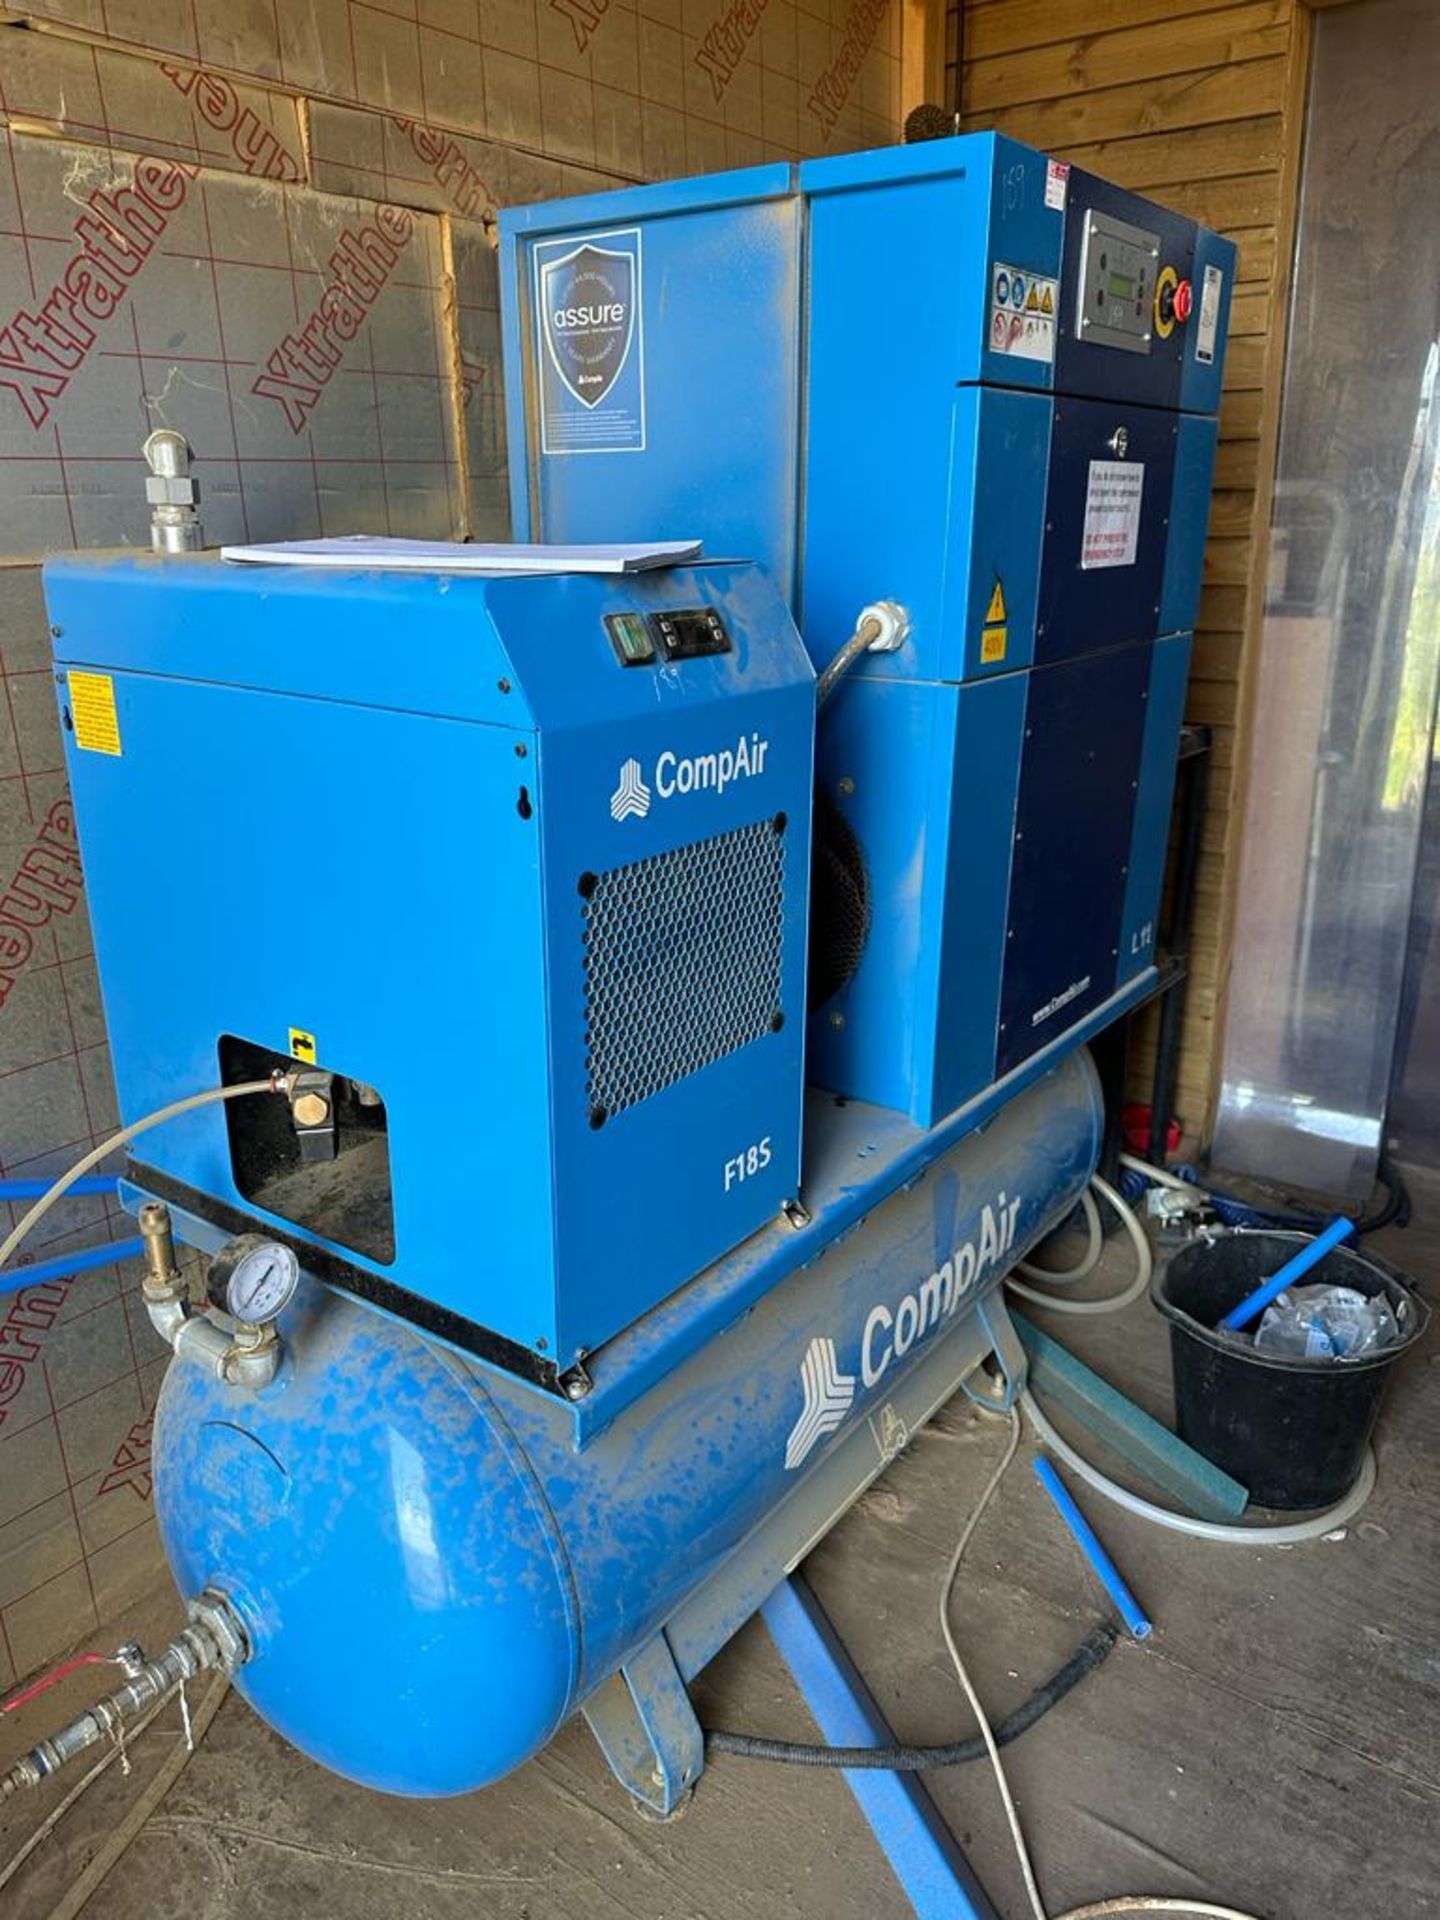 CompAir 11 FS-7.5A RECEIVER MOUNTED AIR COMPRESSOR, S185 DRYER, CONSEP 100 OIL SEPARATOR *PLUS VAT* - Image 2 of 5